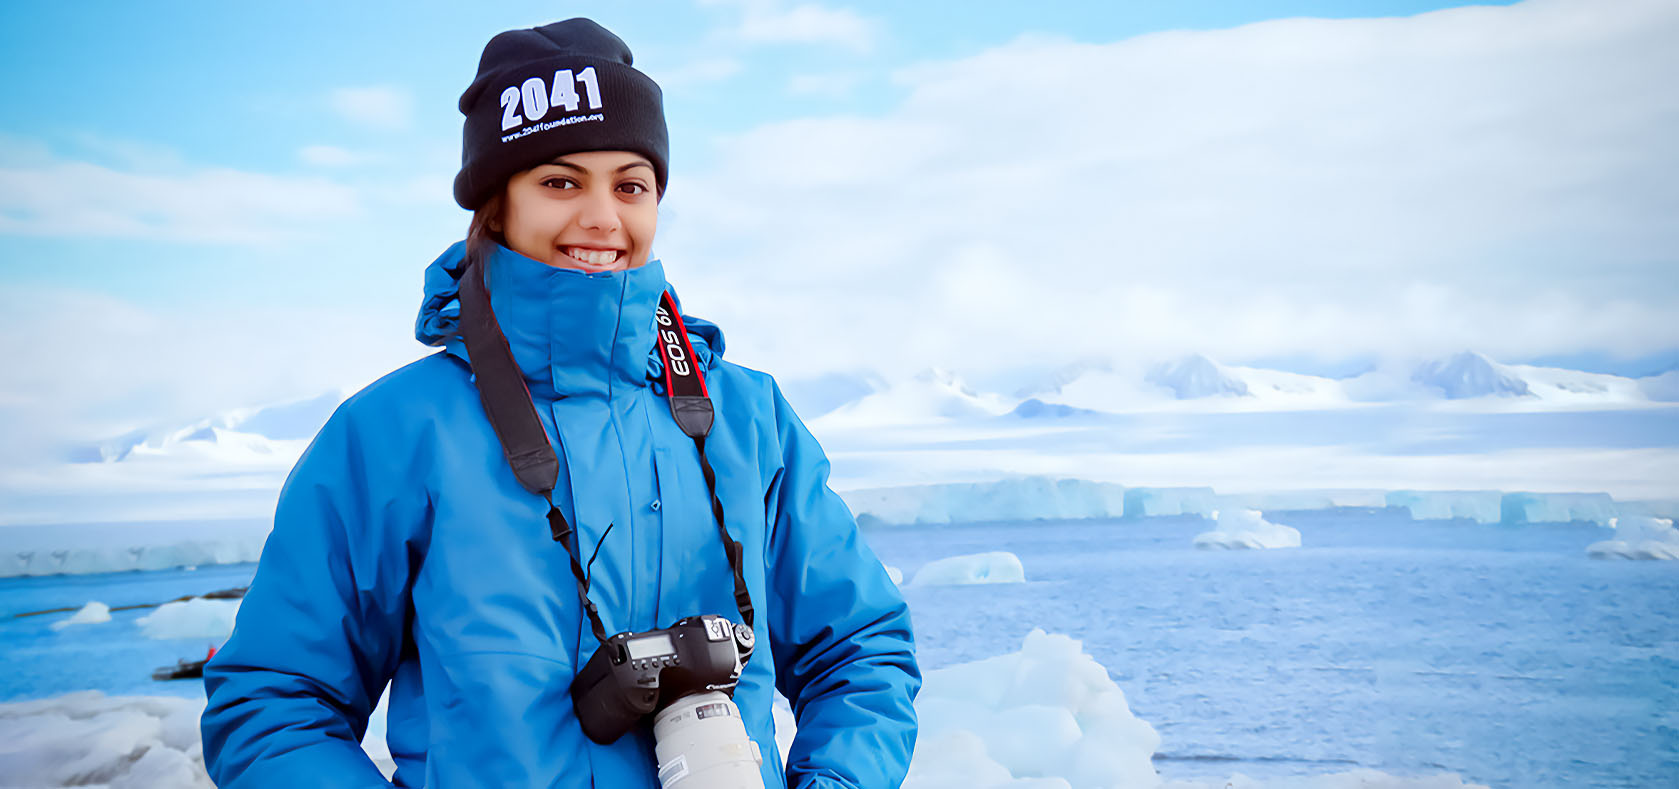 Avani Awasthee, 23, represented India on the International Antarctic Expedition in 2016. Photo: Courtesy of Avani Awasthee